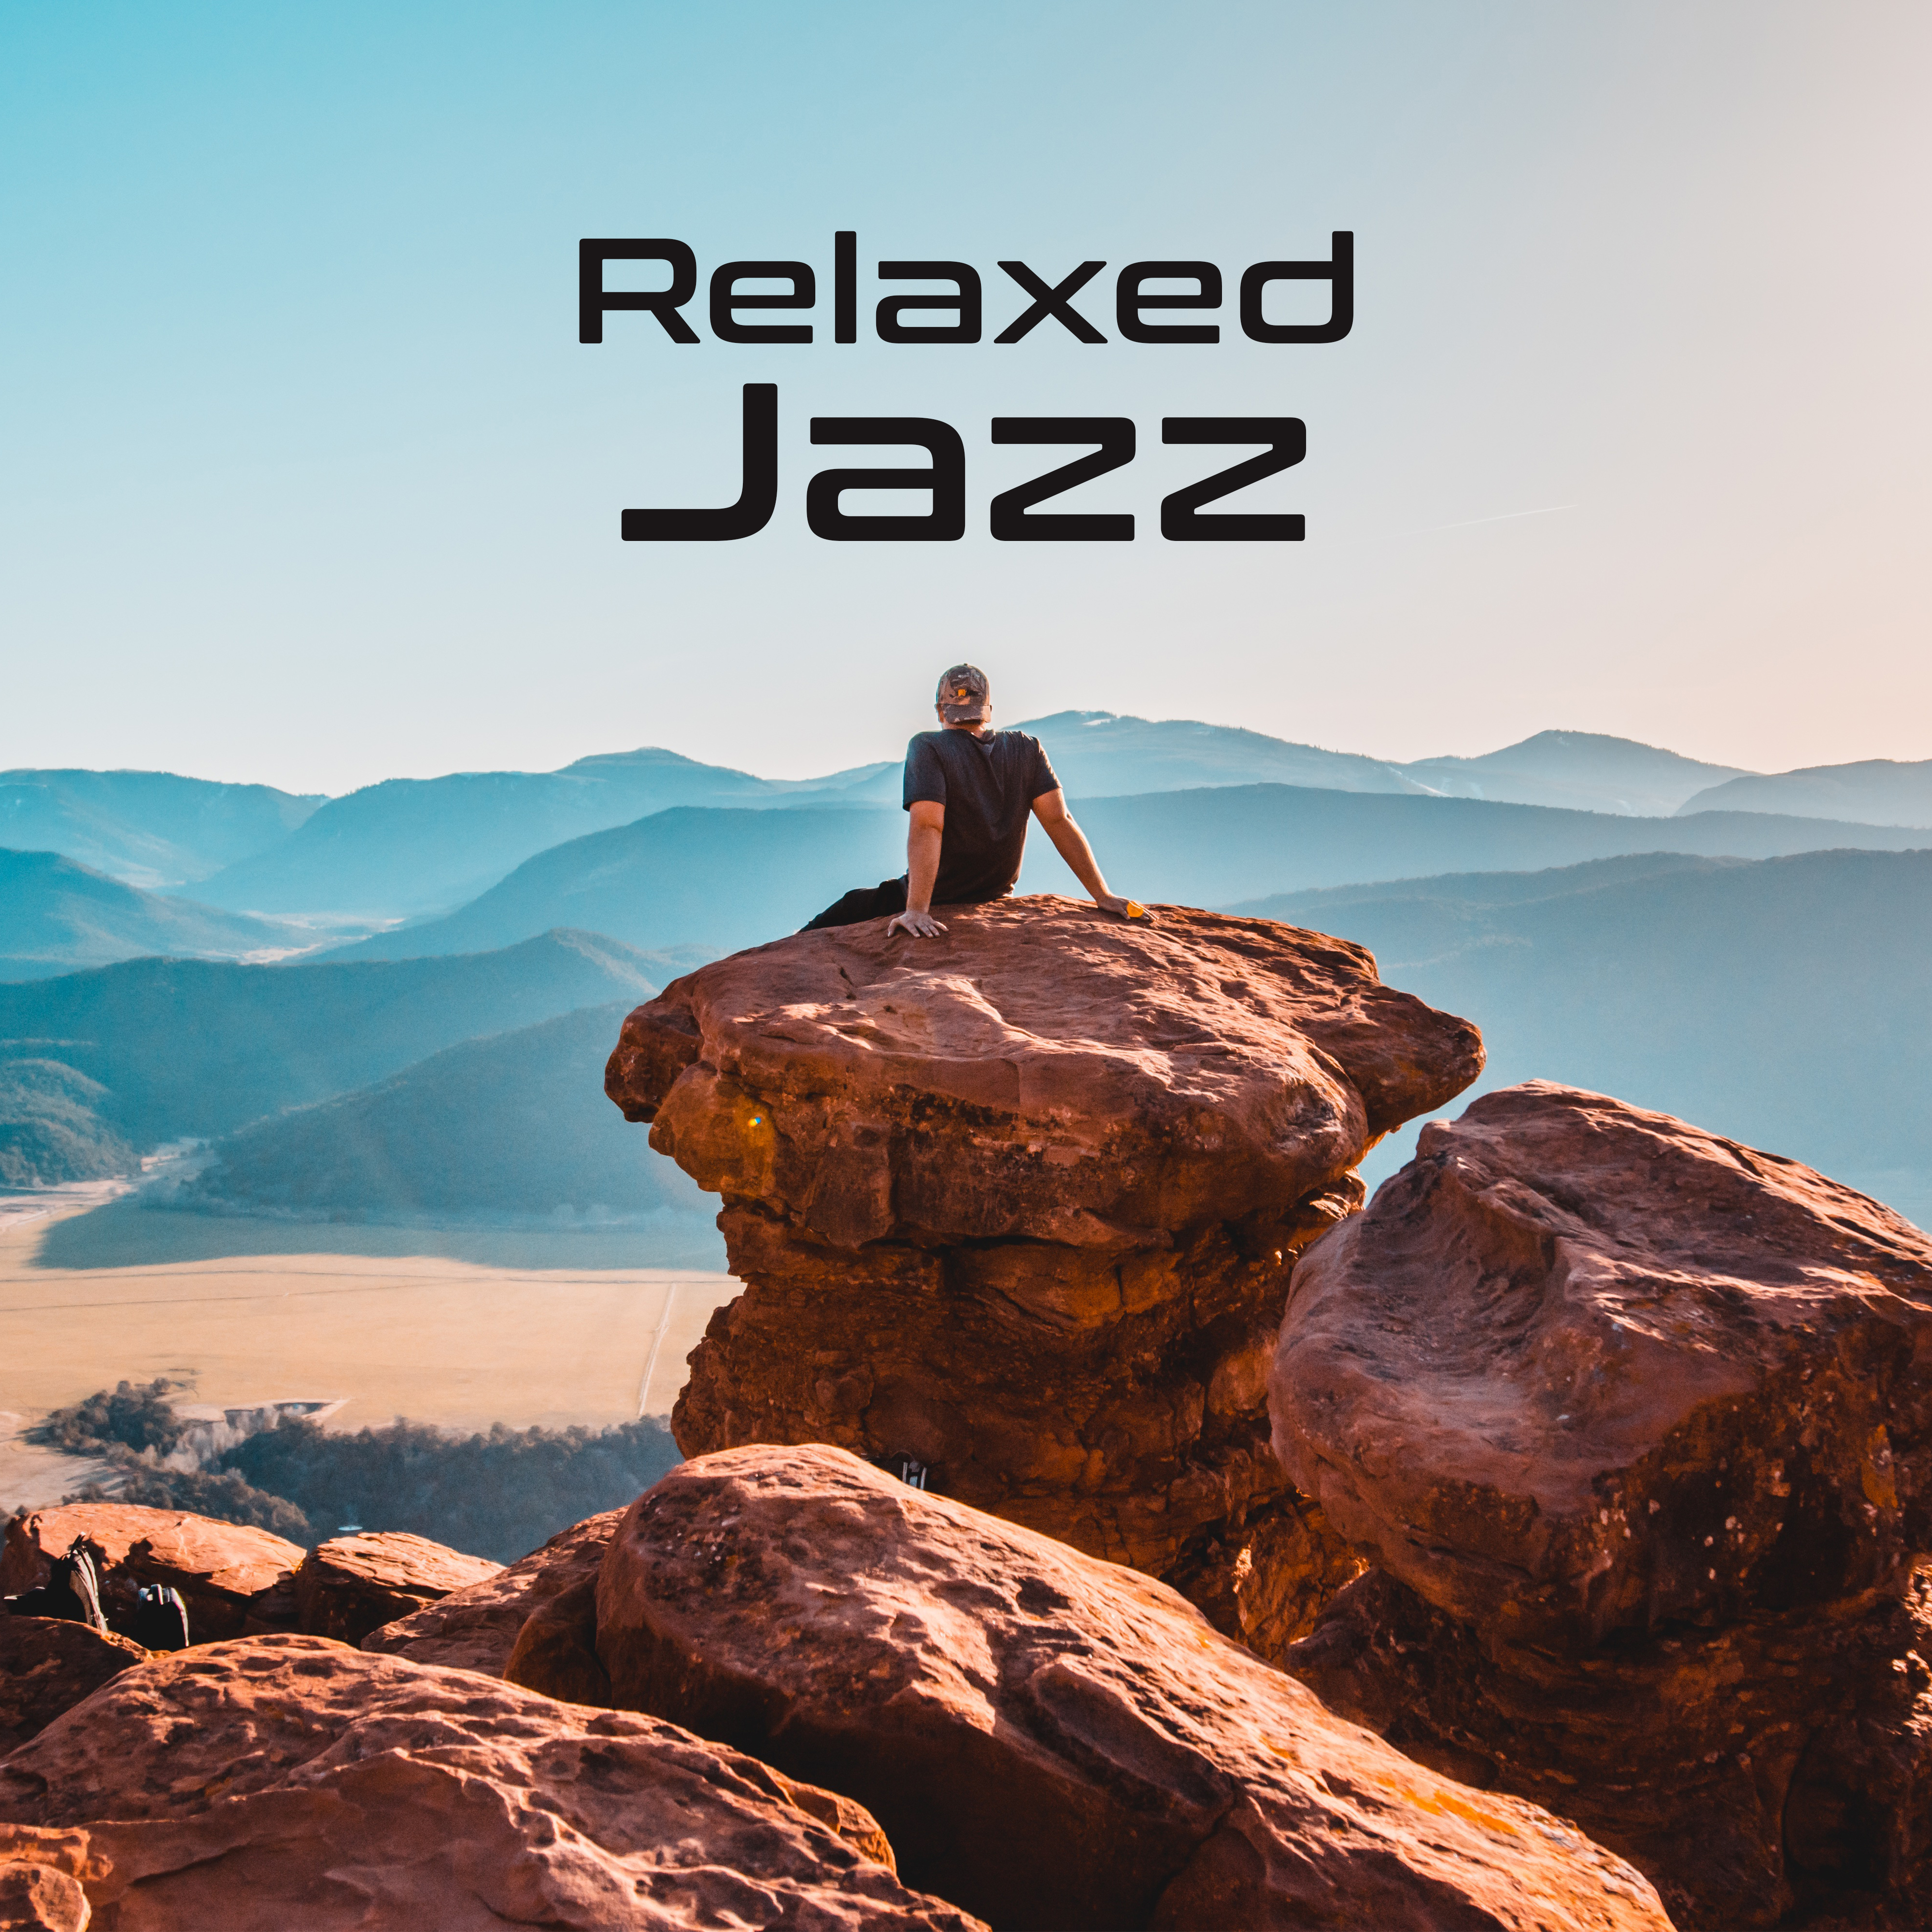 Relaxed Jazz  Best Instrumental Music to Rest, Anti Stress Music, Sounds of Jazz to Calm Down, Relaxation, Peaceful Mind